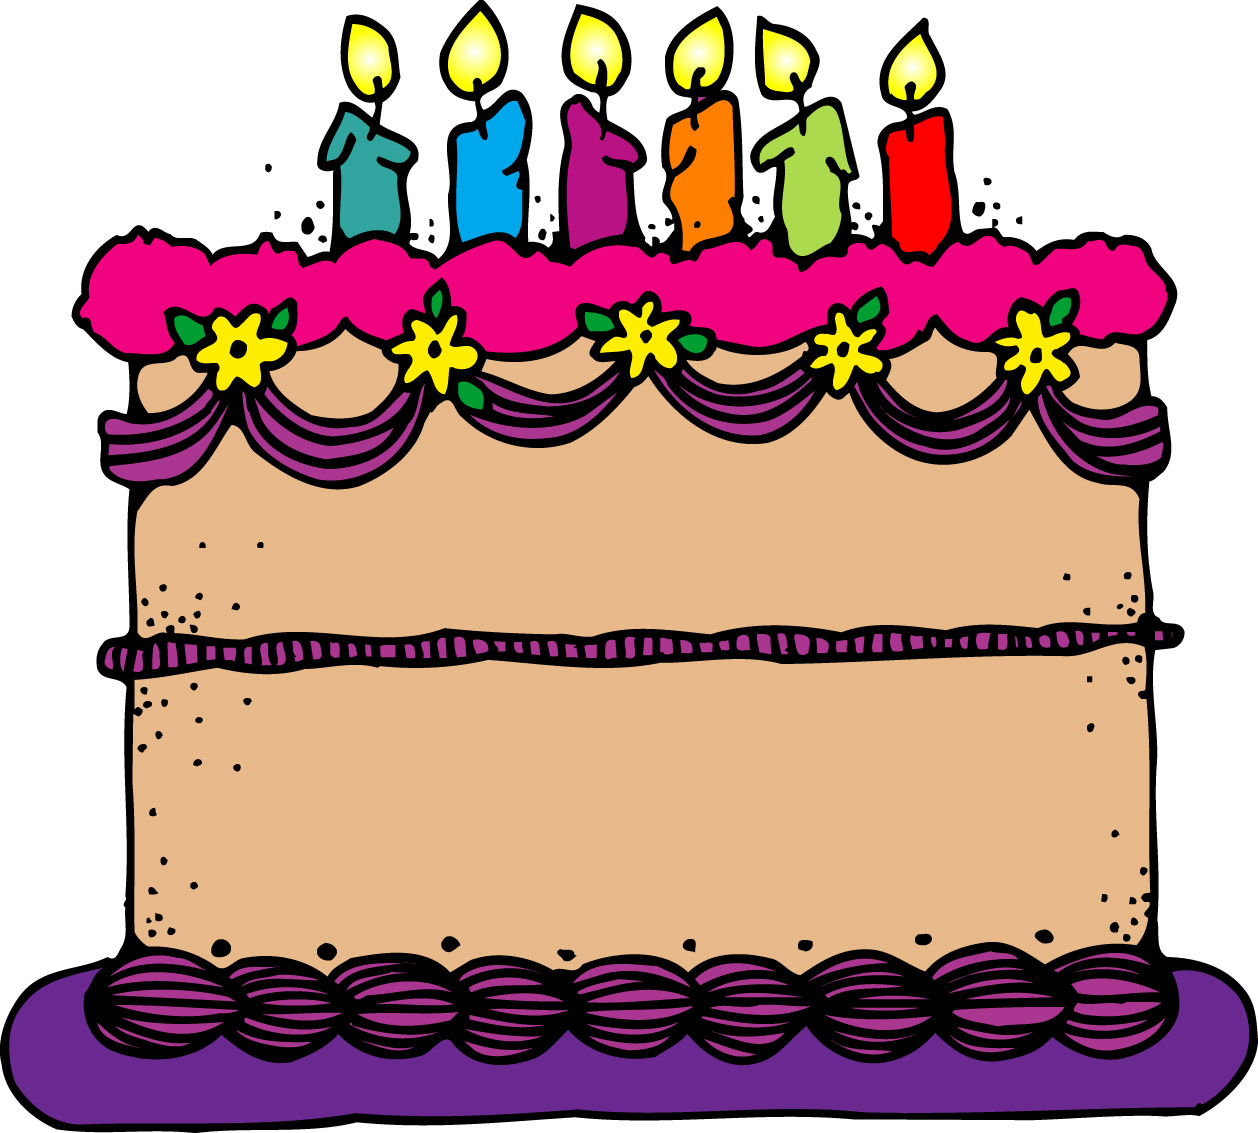 Birthday cake clip art | Download Clip Art and Photo Free